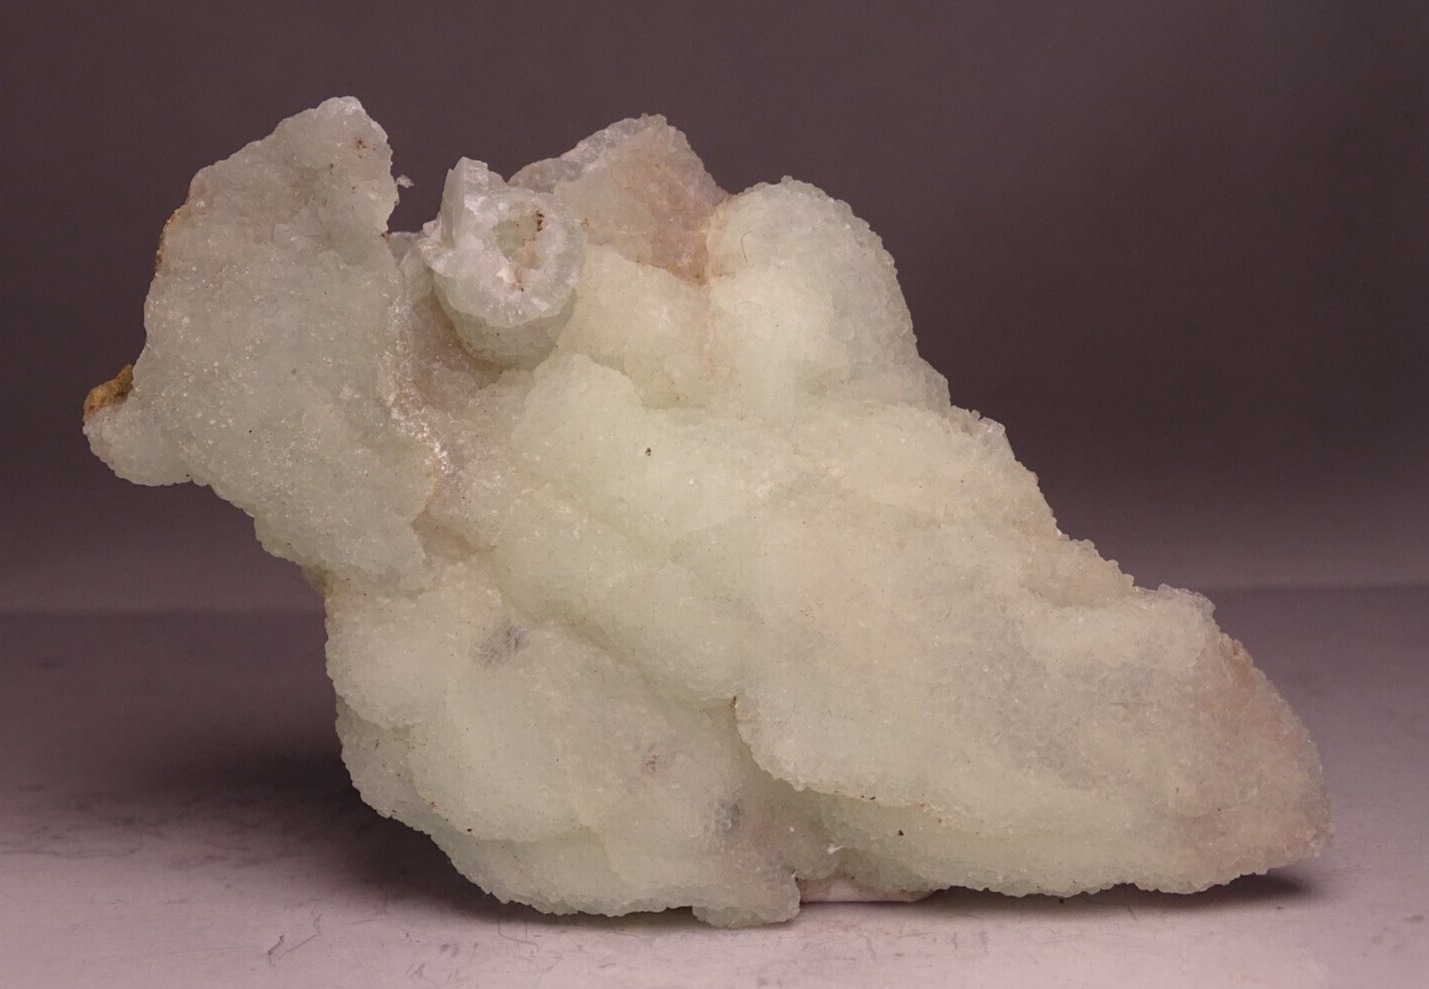 Prehnite aft Anhydrite Mold Mineral Collector Specimen Prospect Park New Jersey